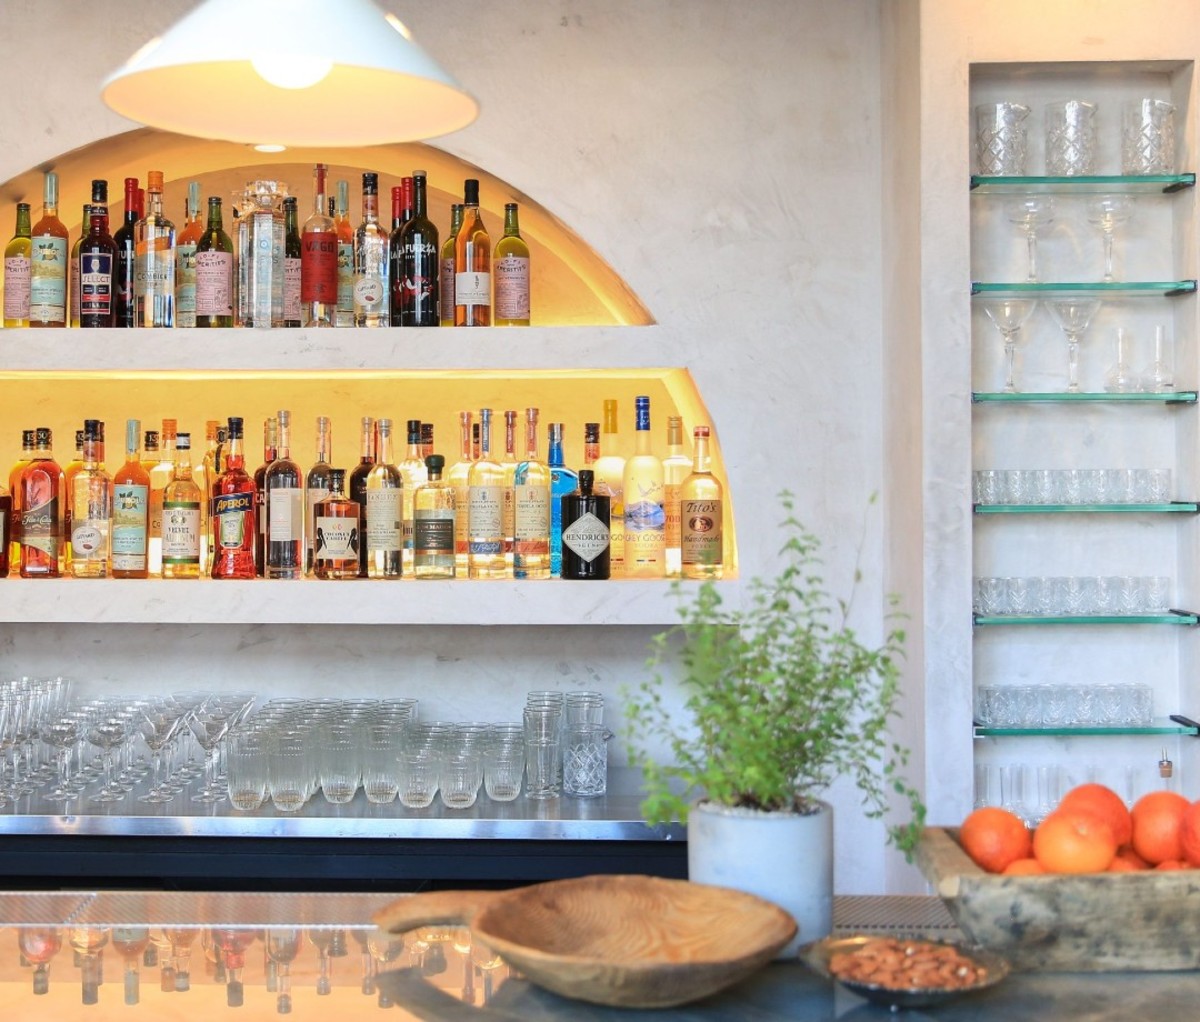 Bright arched bar with bottles on shelves